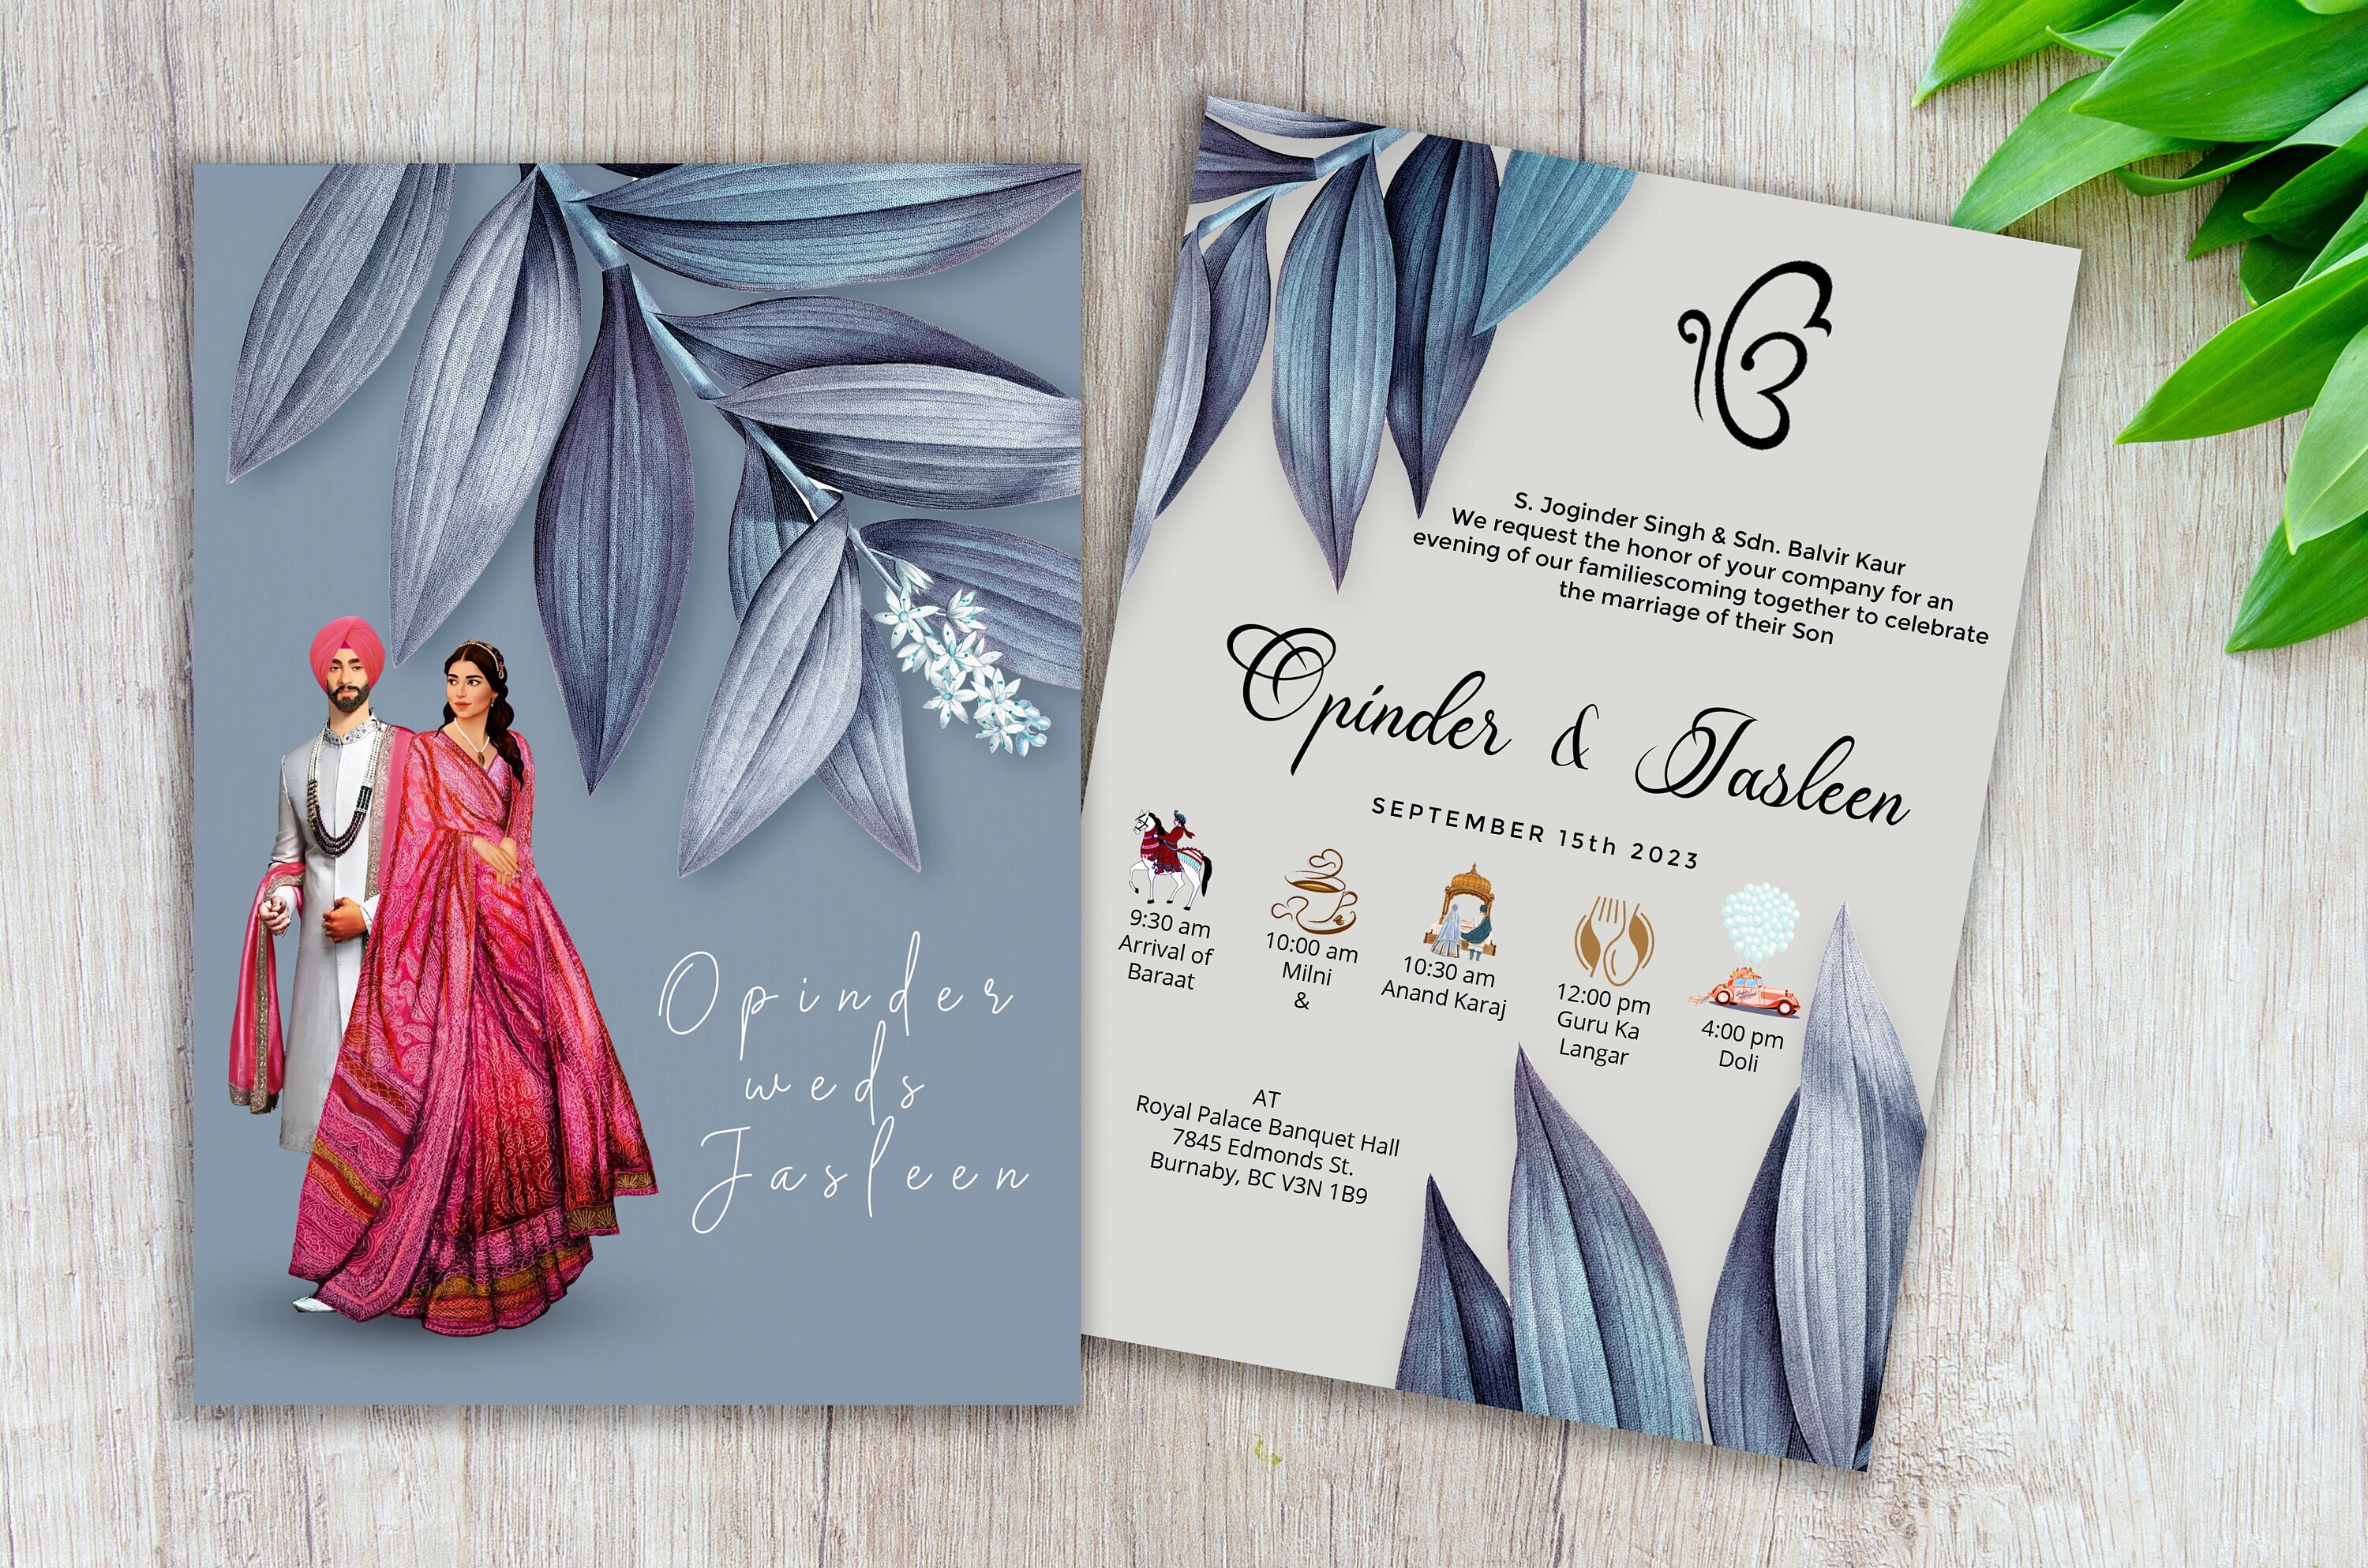 Kitchen Wedding Gifts For Newlyweds by Joginder Singh - Issuu